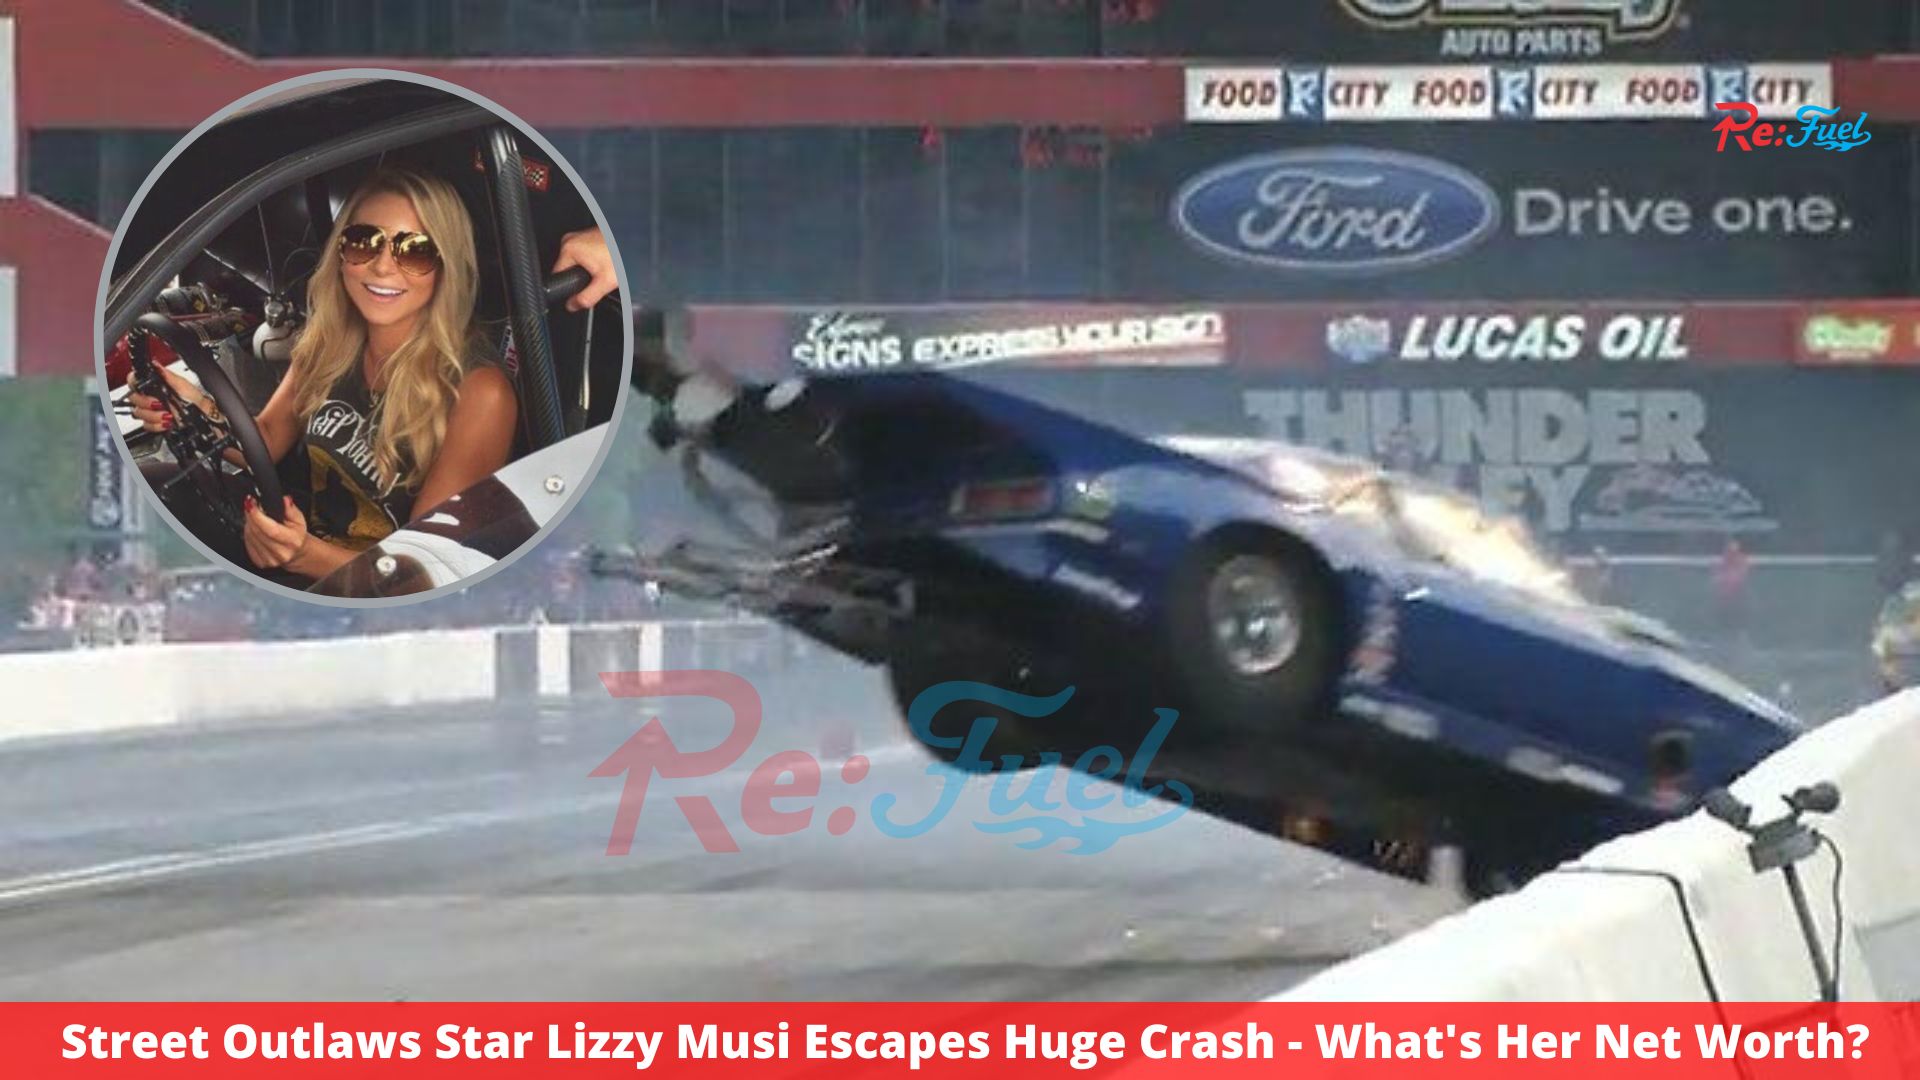 Street Outlaws Star Lizzy Musi Escapes Huge Crash - What's Her Net Worth?